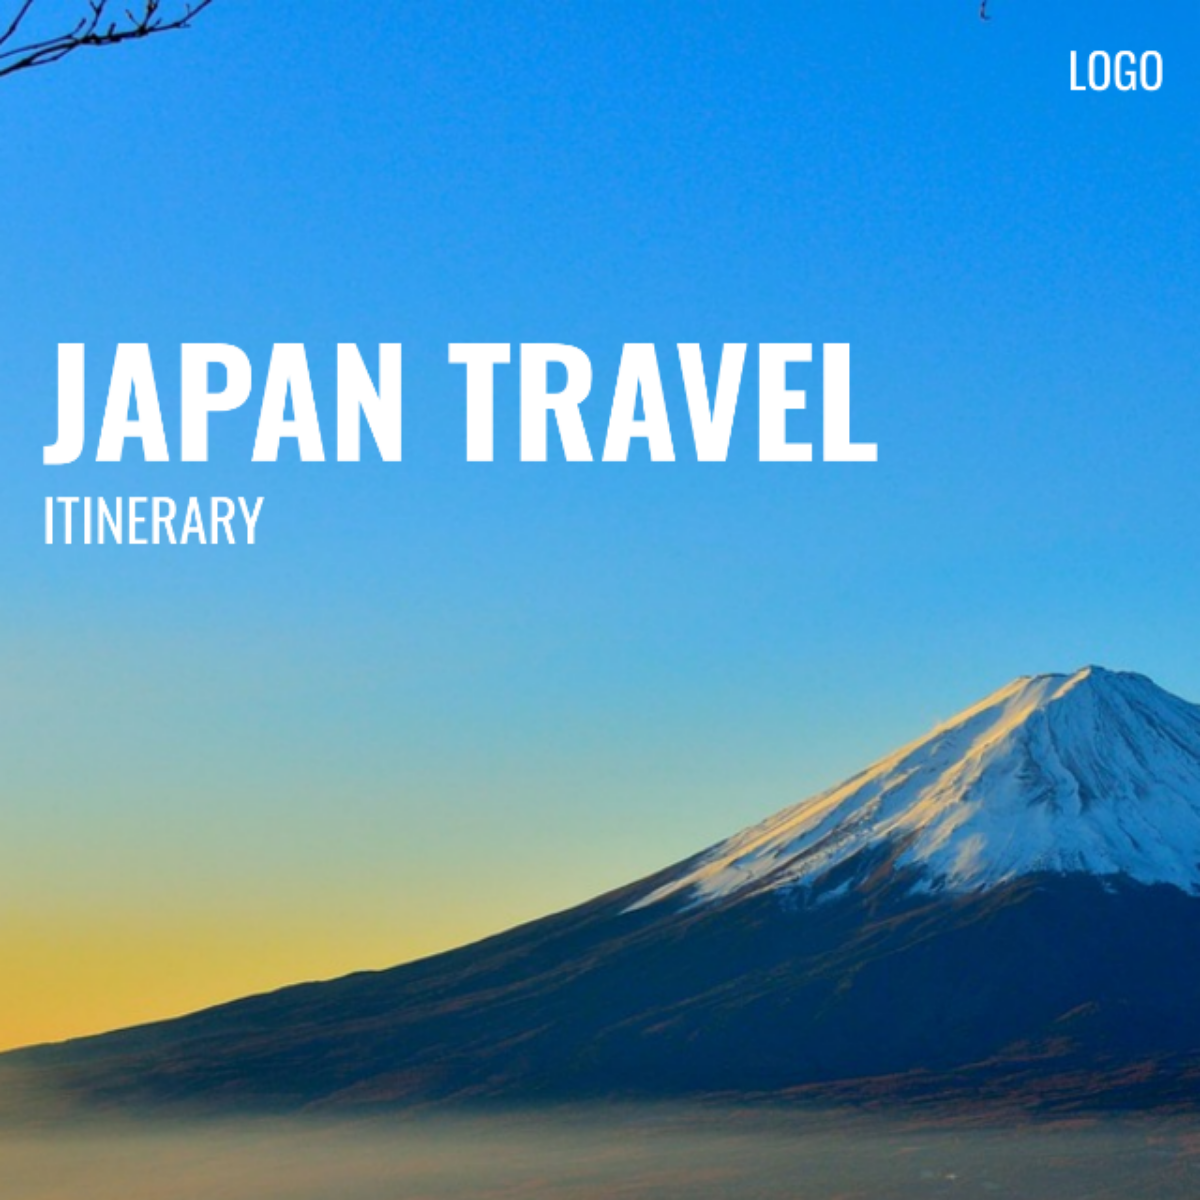 Japan Travel Itinerary Template